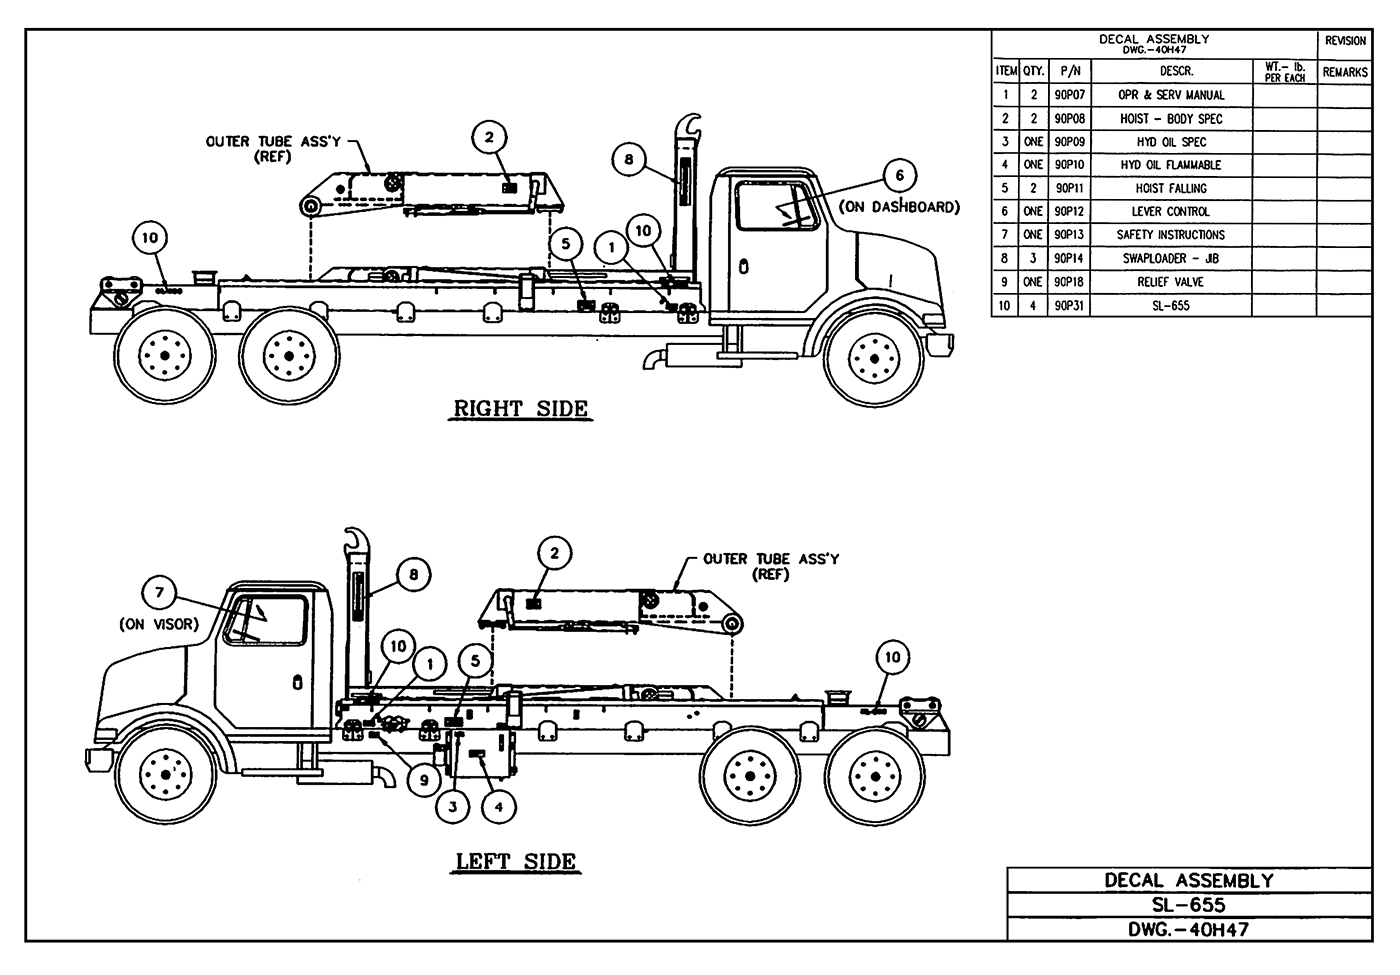 SL-655 Base Decal Assembly Diagram